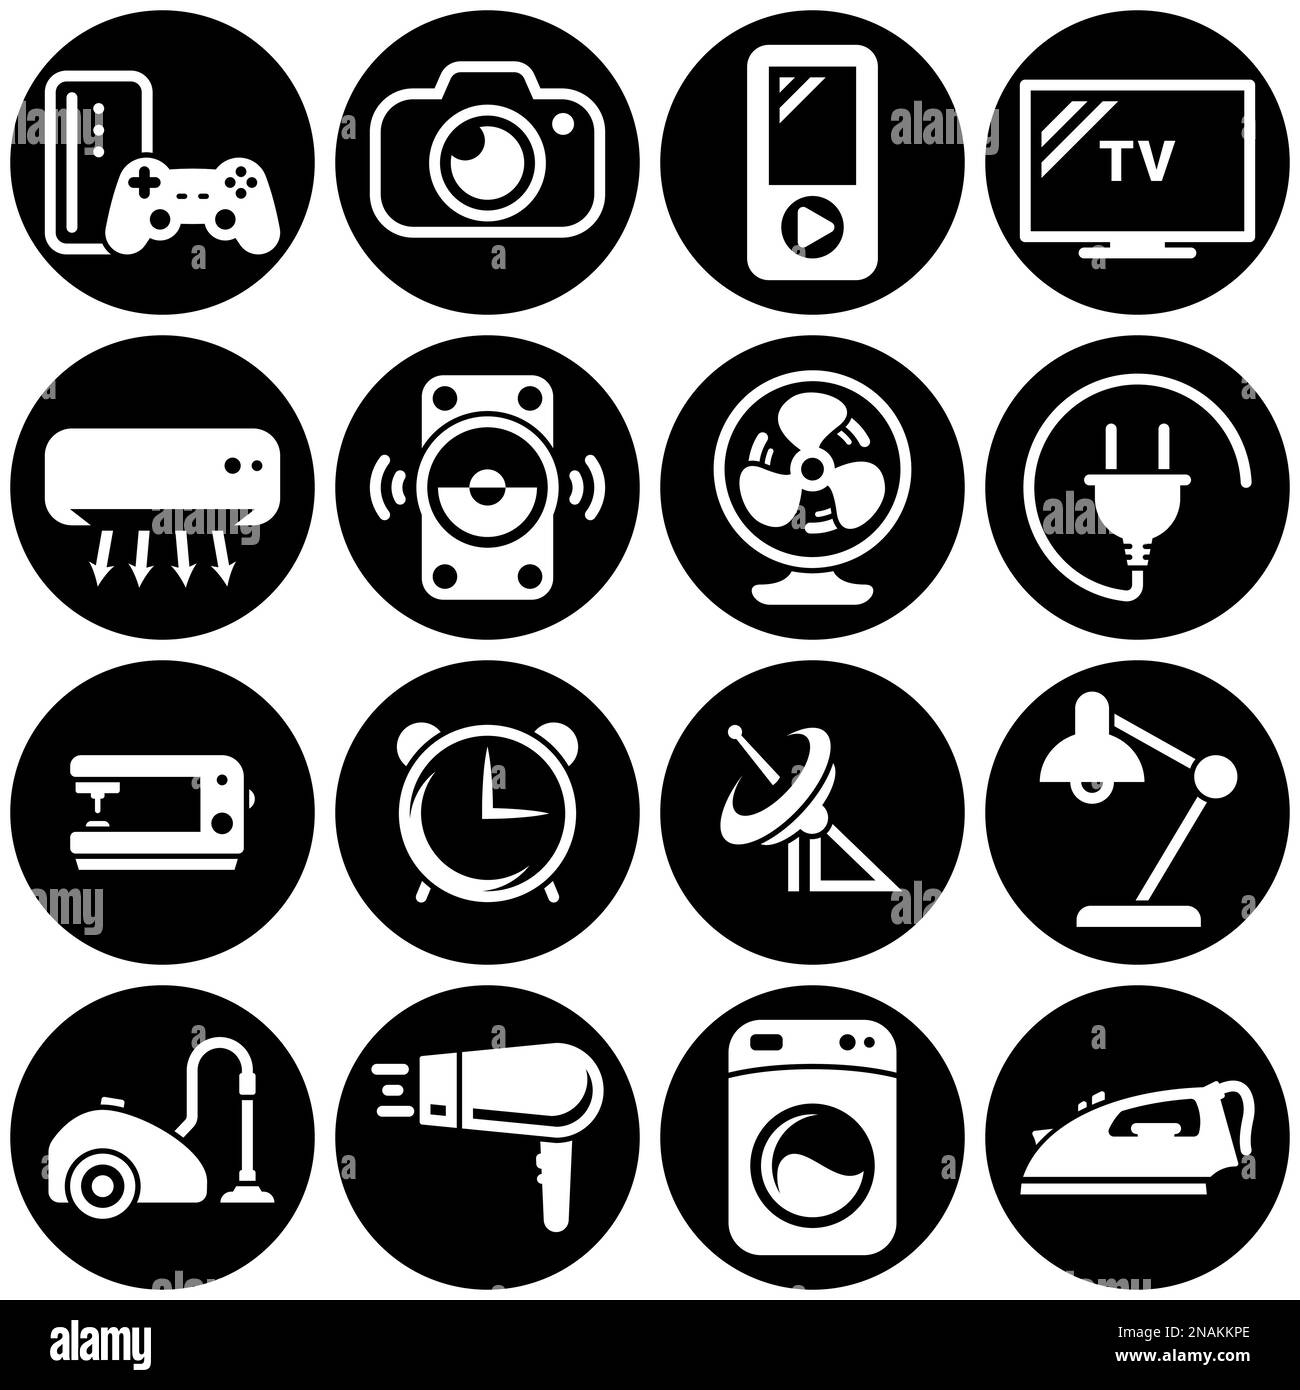 Set of simple icons on a theme Home, home appliances, household, vector, design, collection, flat, sign, symbol,element, object, illustration. White b Stock Vector